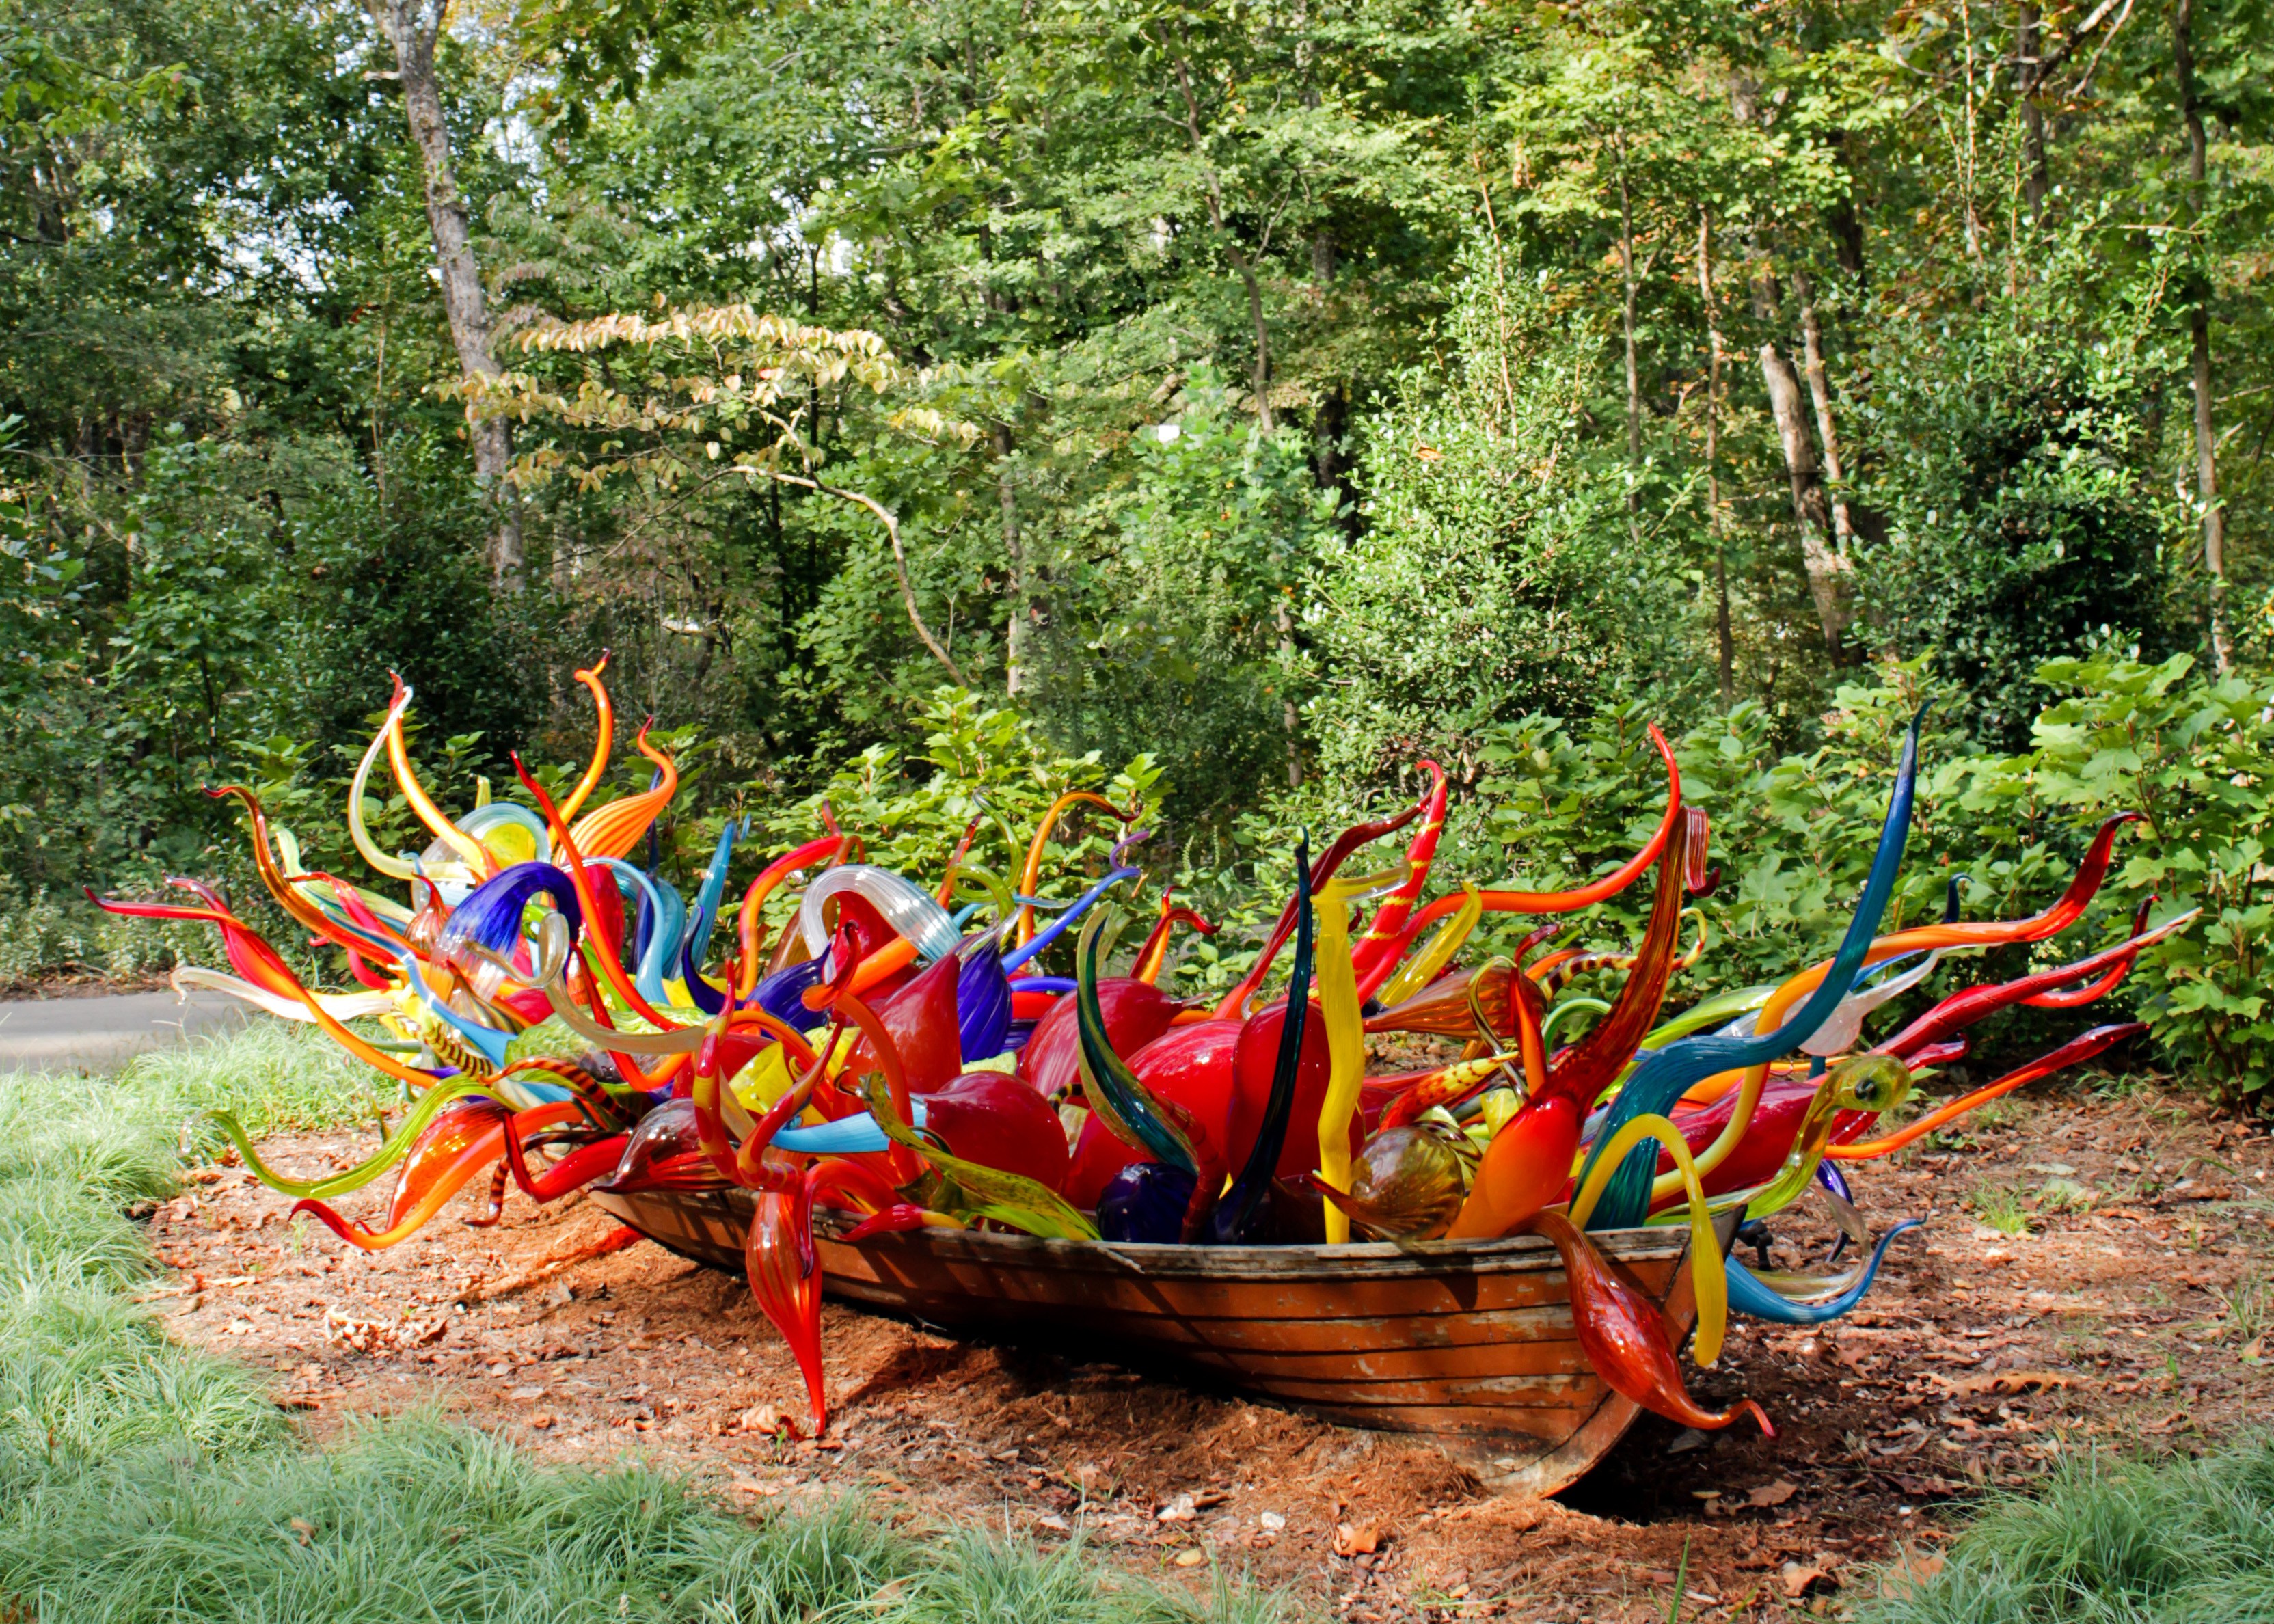 5 Things to Know Before Visiting a Chihuly Exhibit - Everyday Wanderer